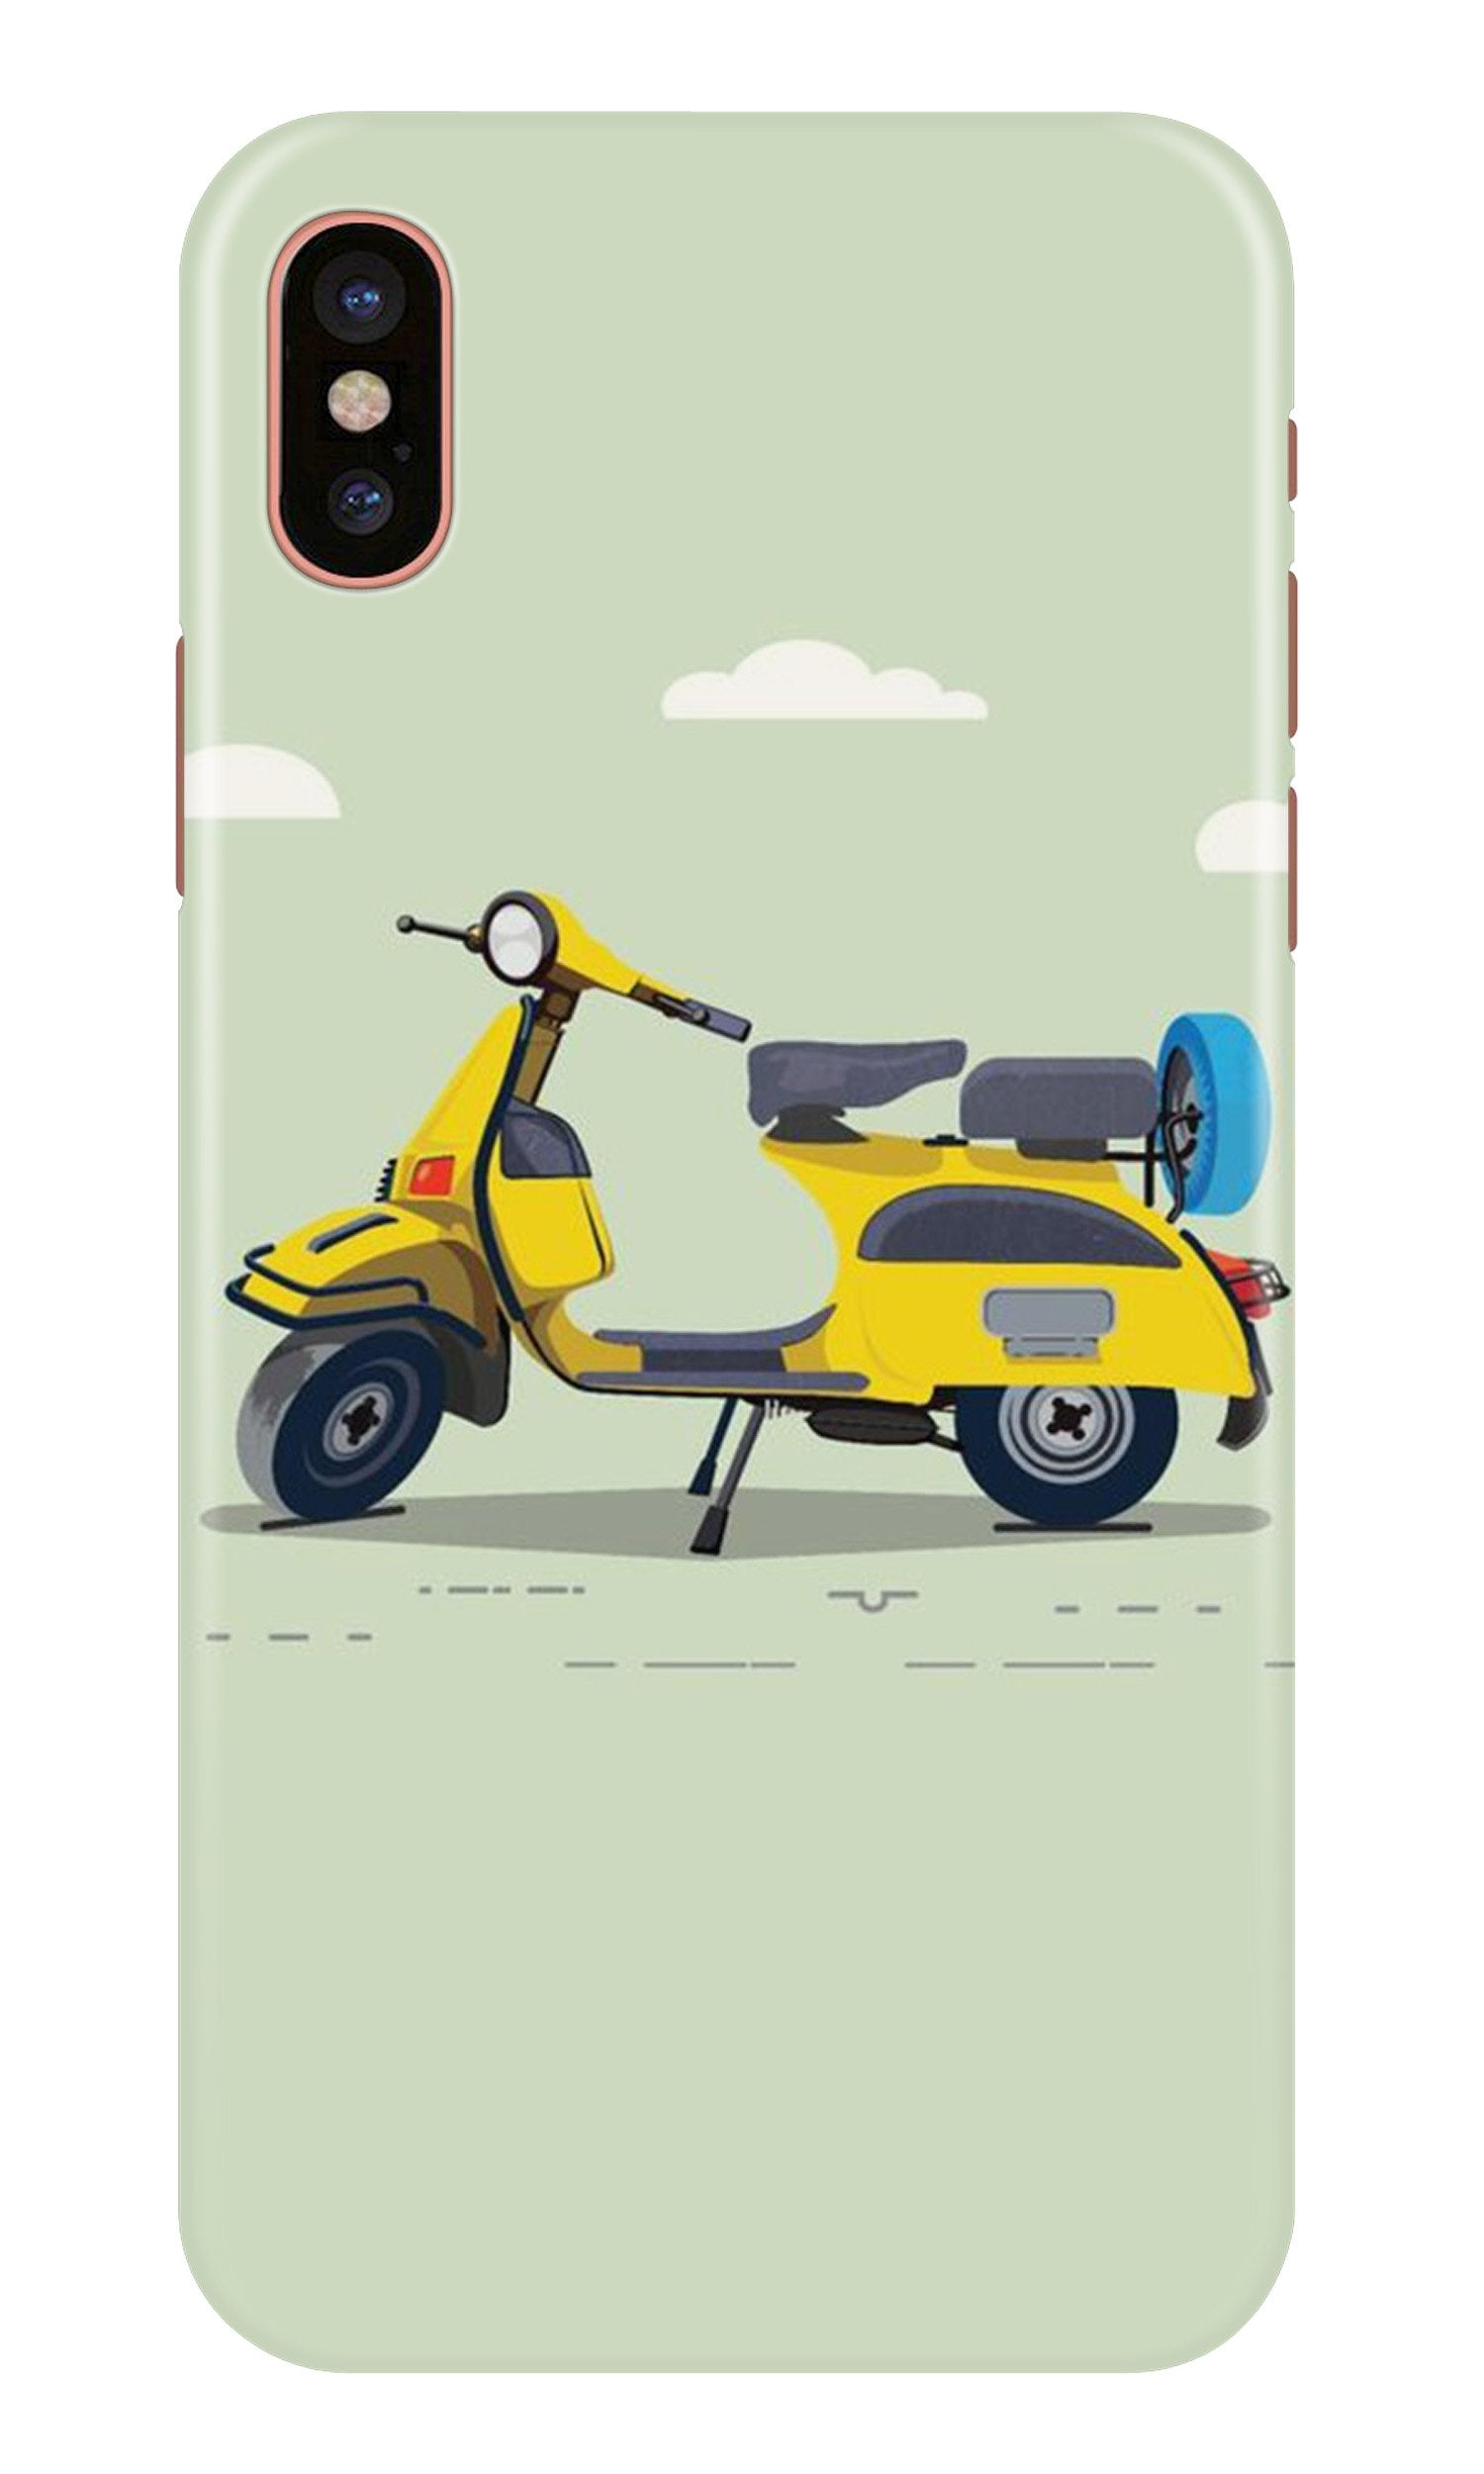 Vintage Scooter Case for iPhone X (Design No. 260)